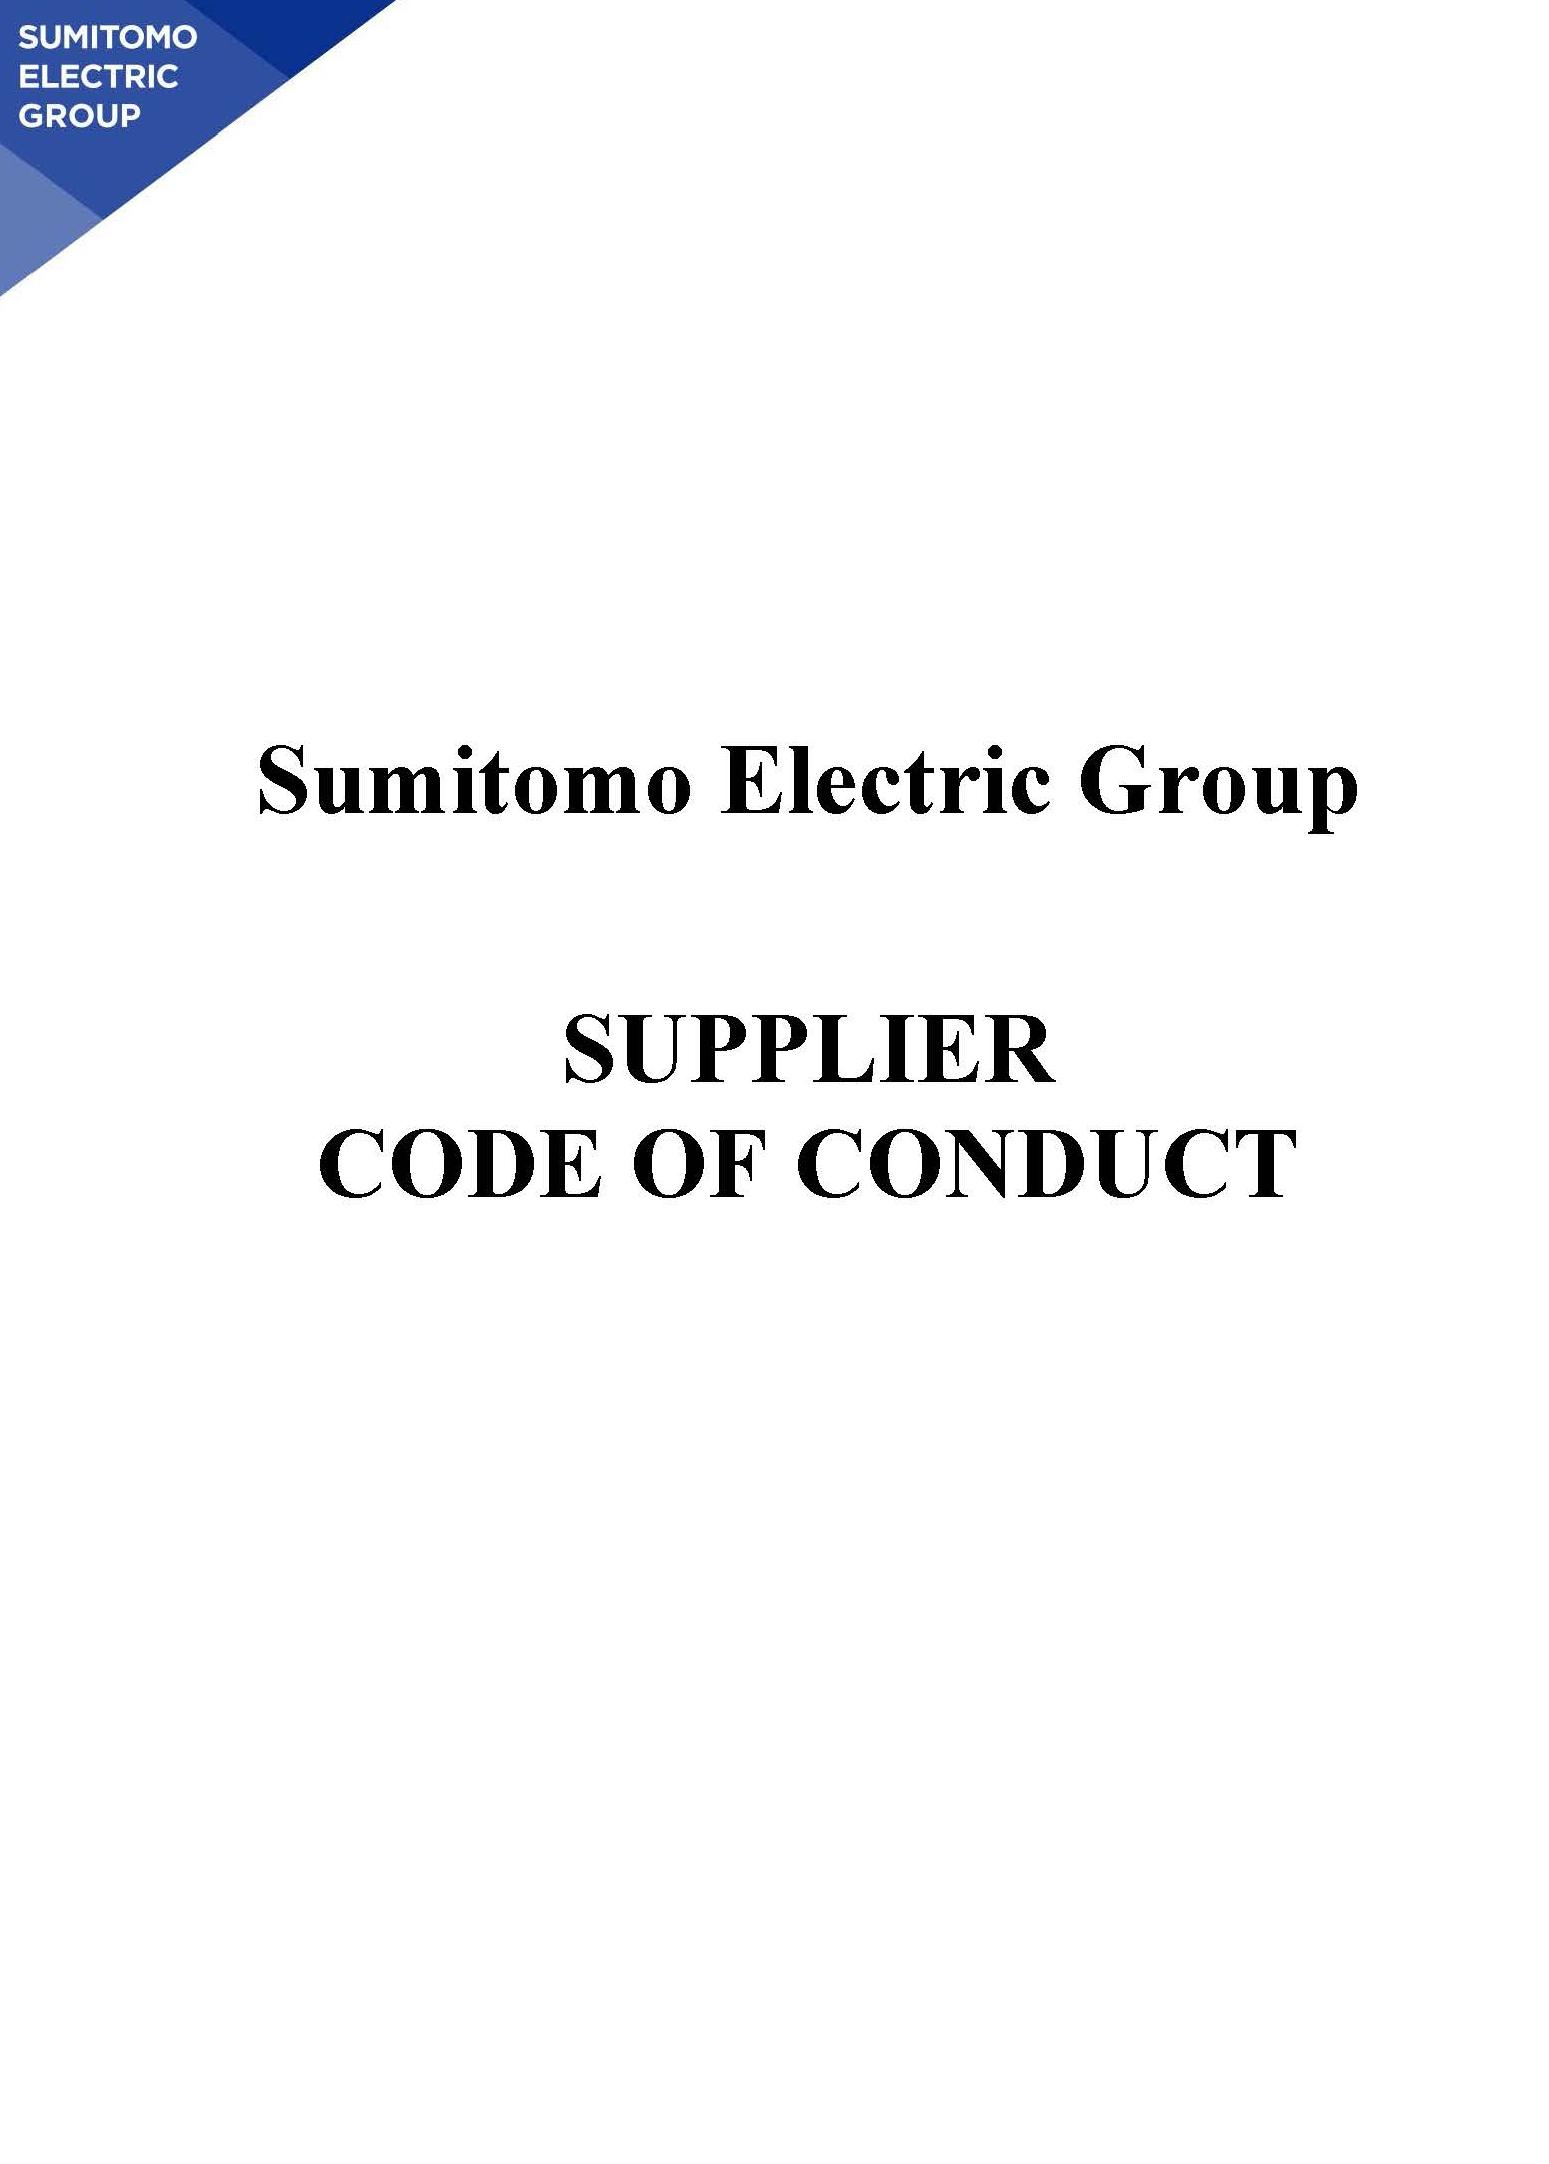 The Supplier Code of Conduct